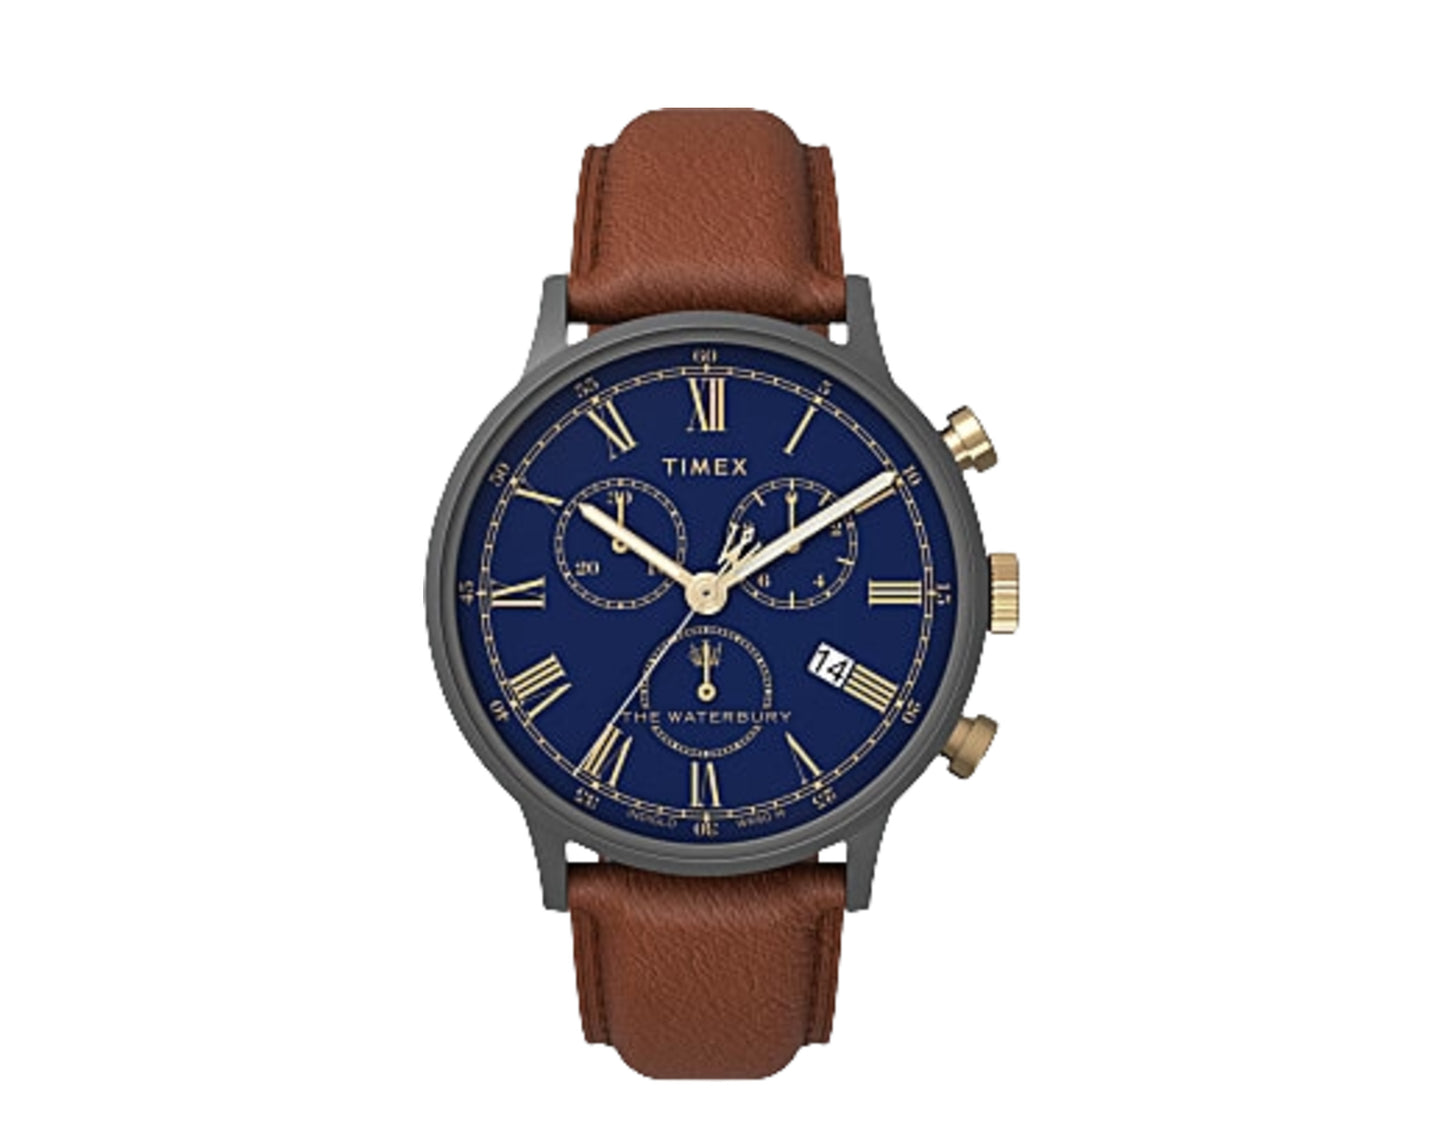 Timex Waterbury Classic Chronograph 40mm Leather Strap Watch